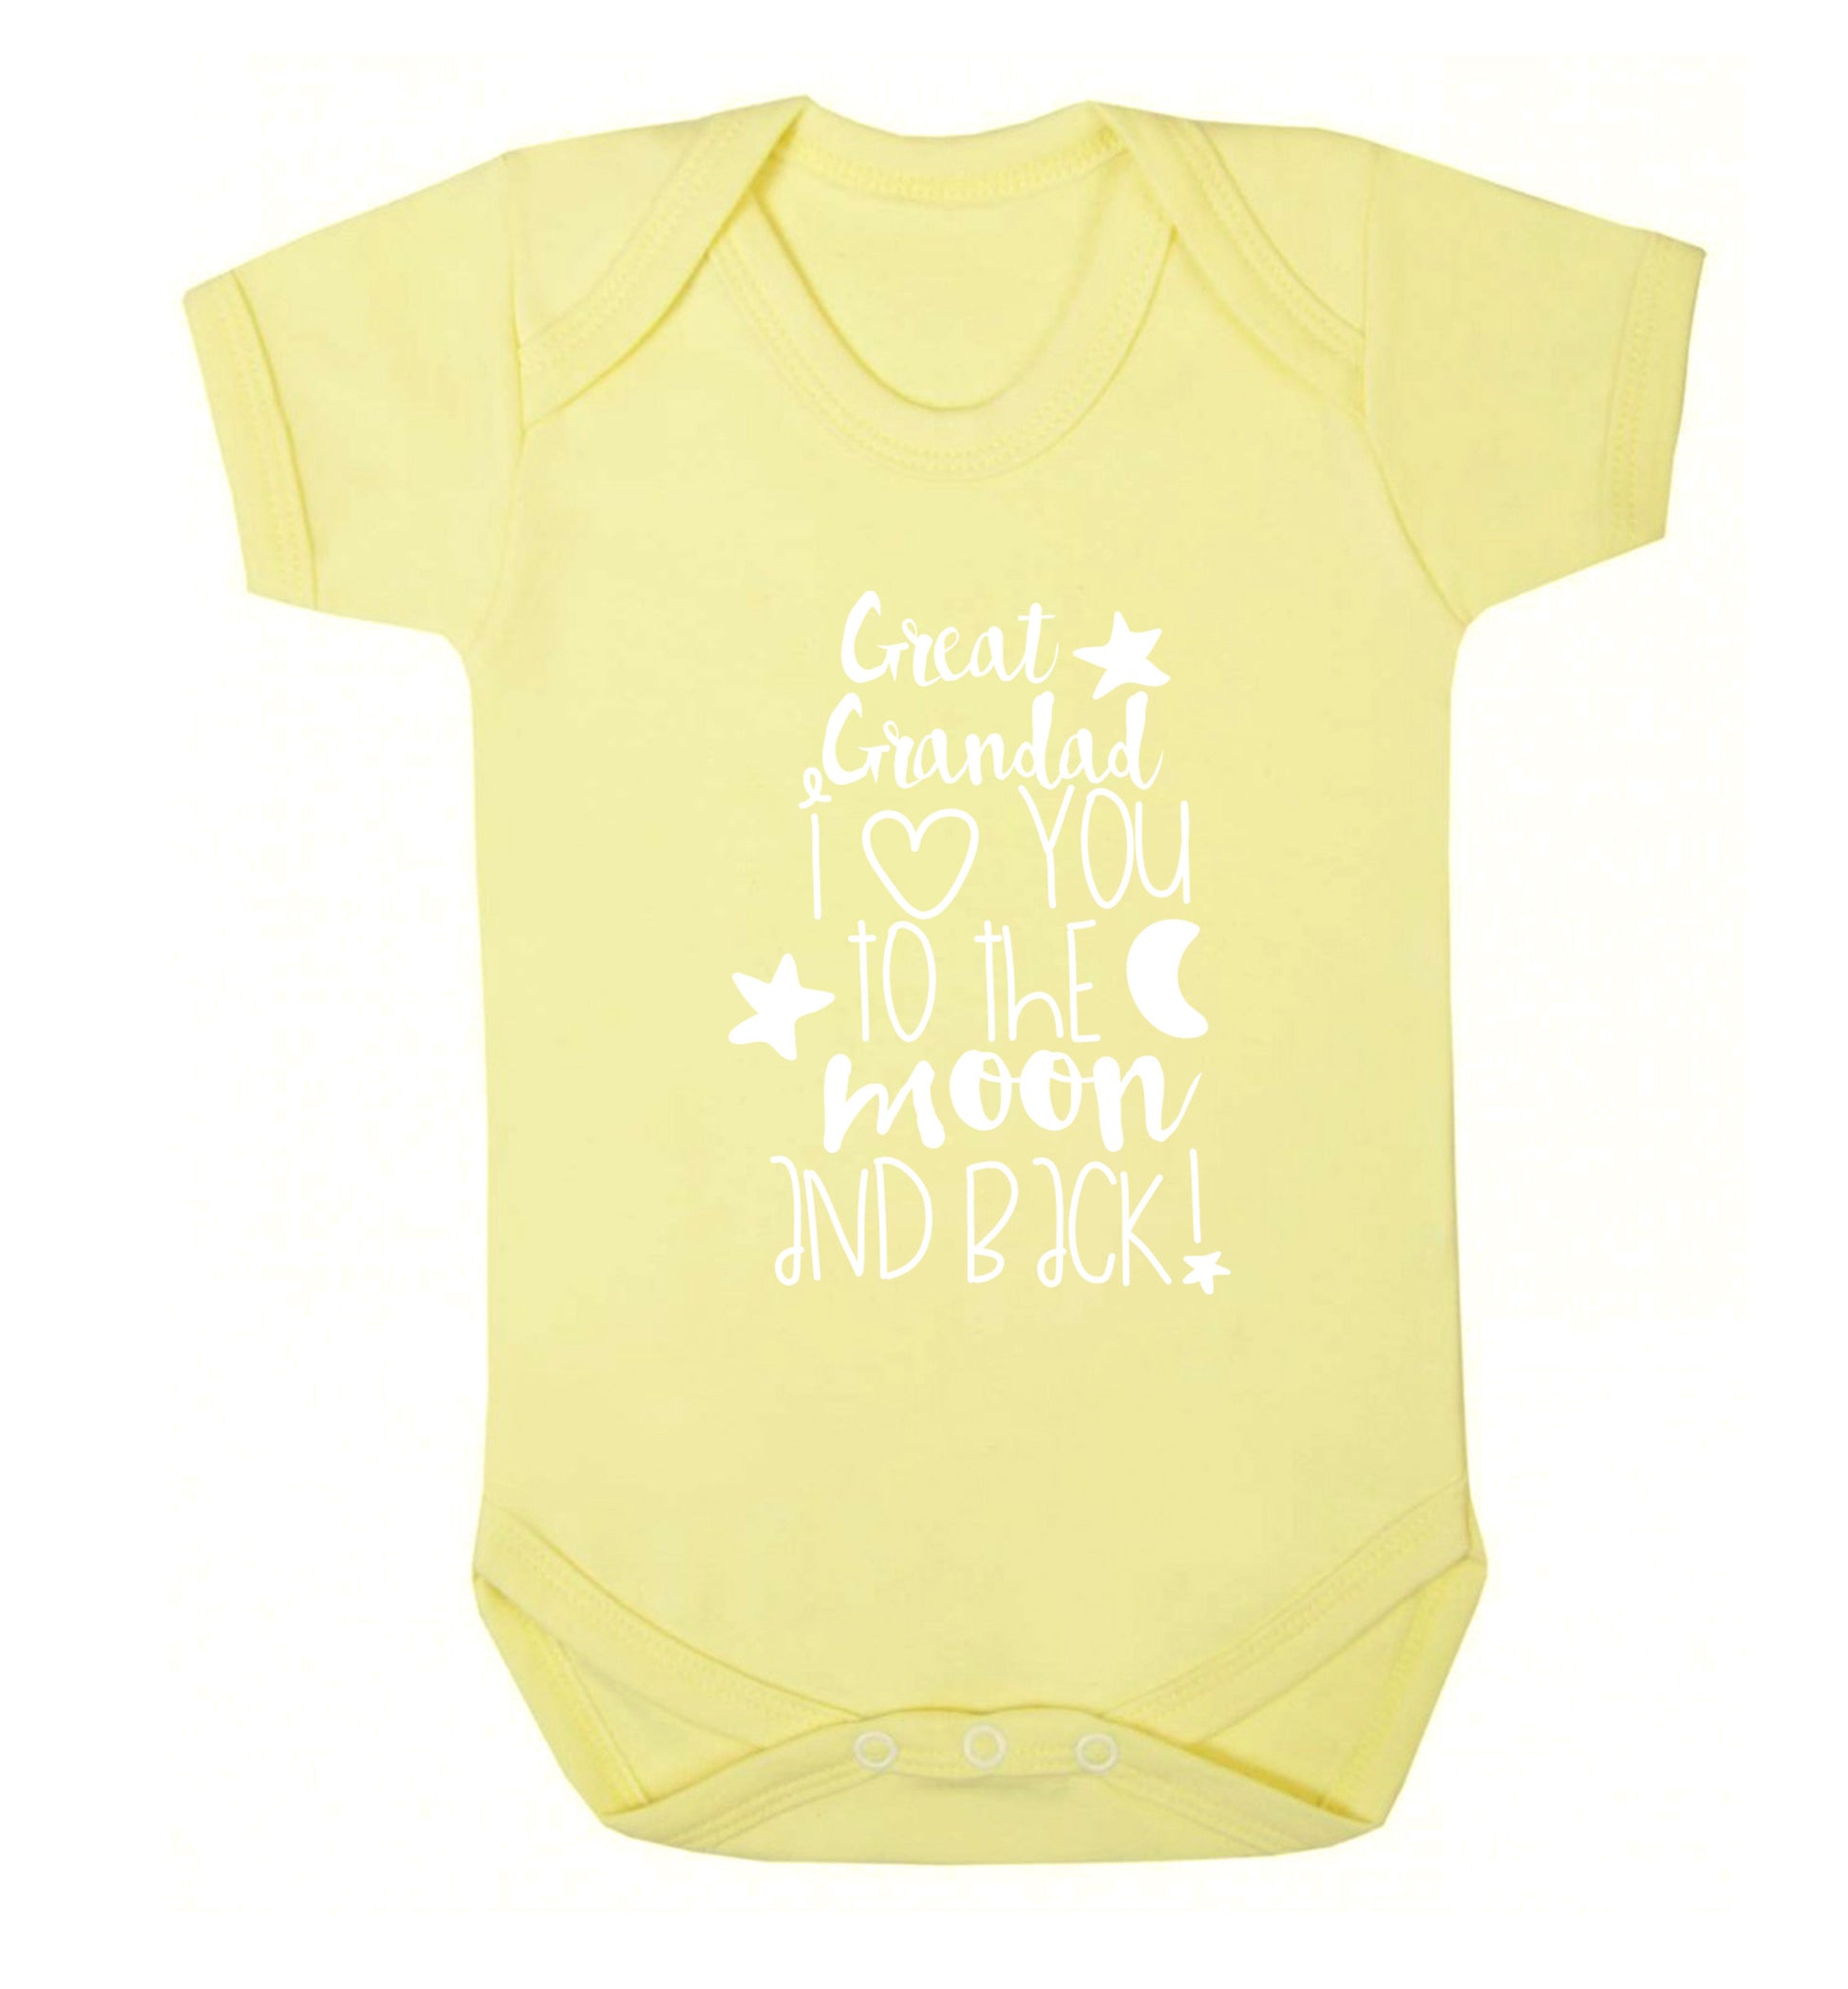 Great Grandad I love you to the moon and back Baby Vest pale yellow 18-24 months